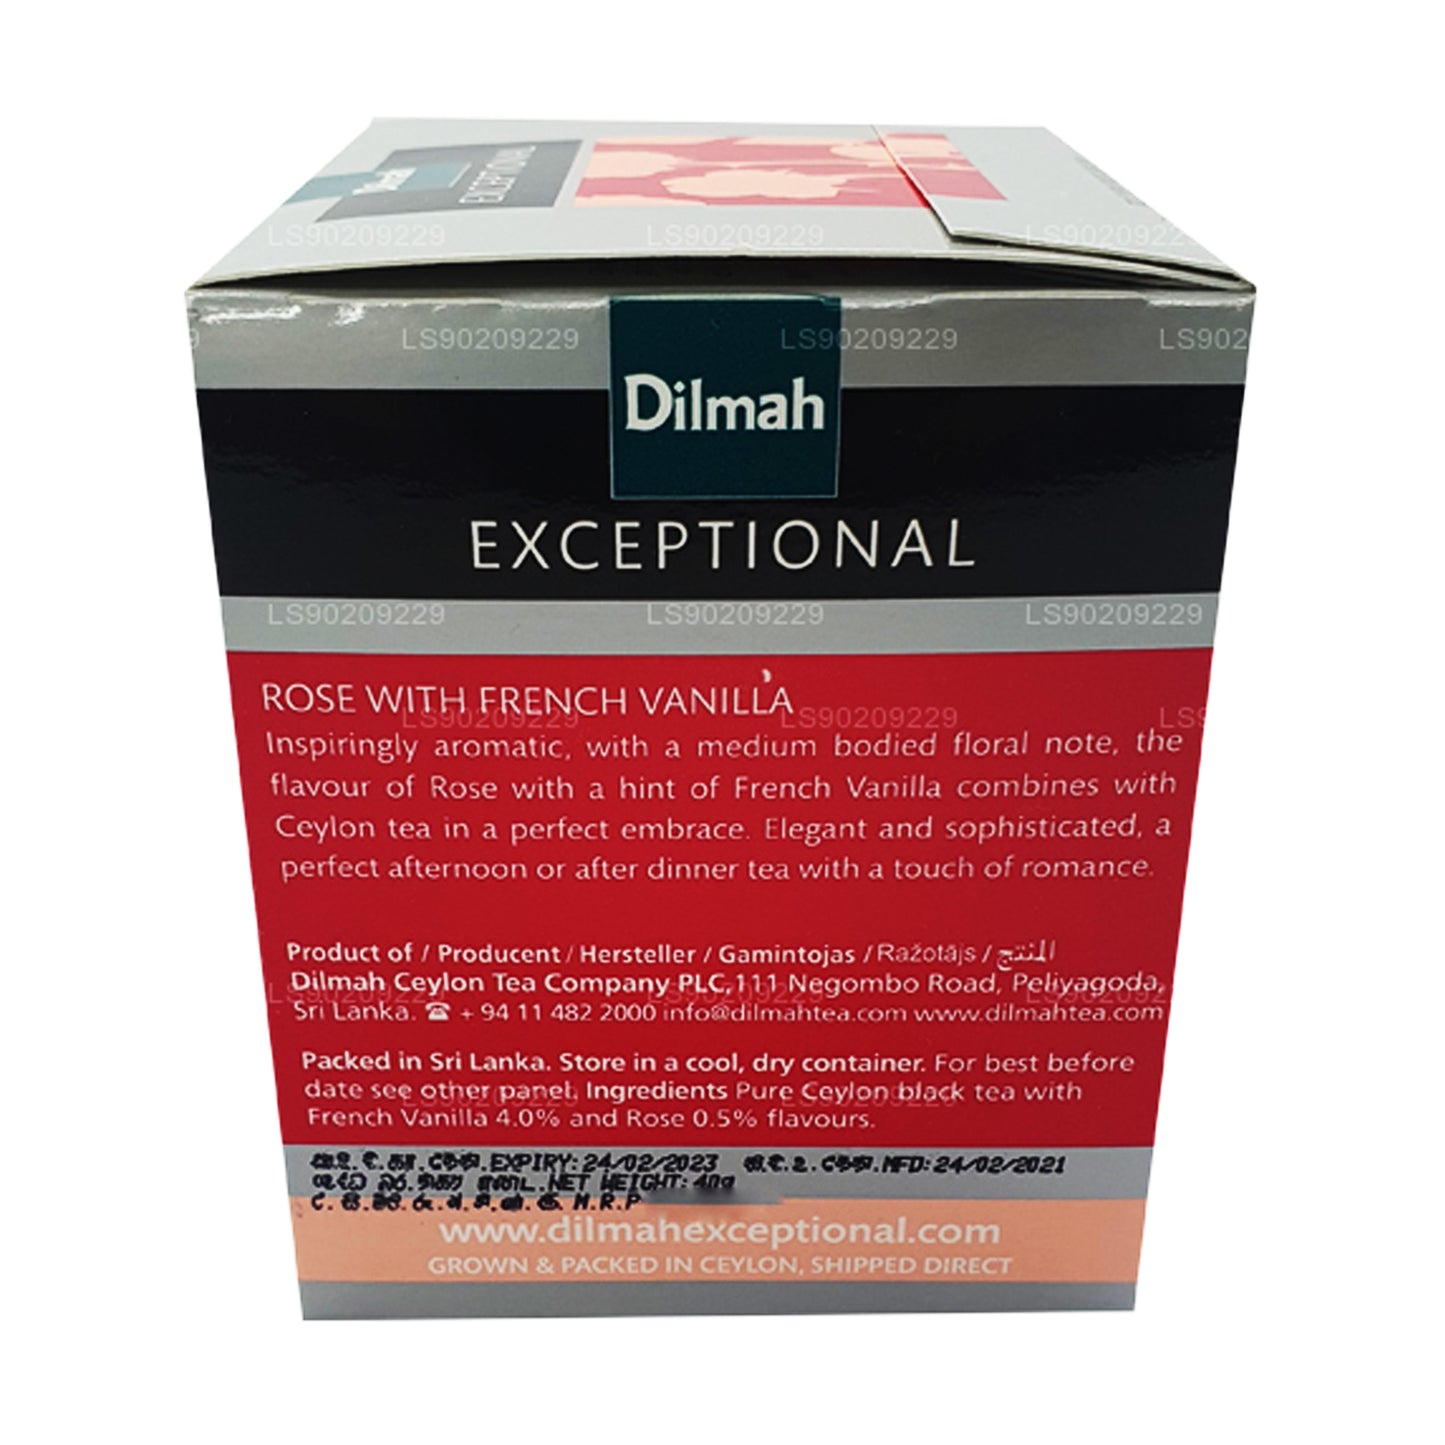 Dilmah Exceptional Rose with French Vanilla (40g) 20 Tea Bags